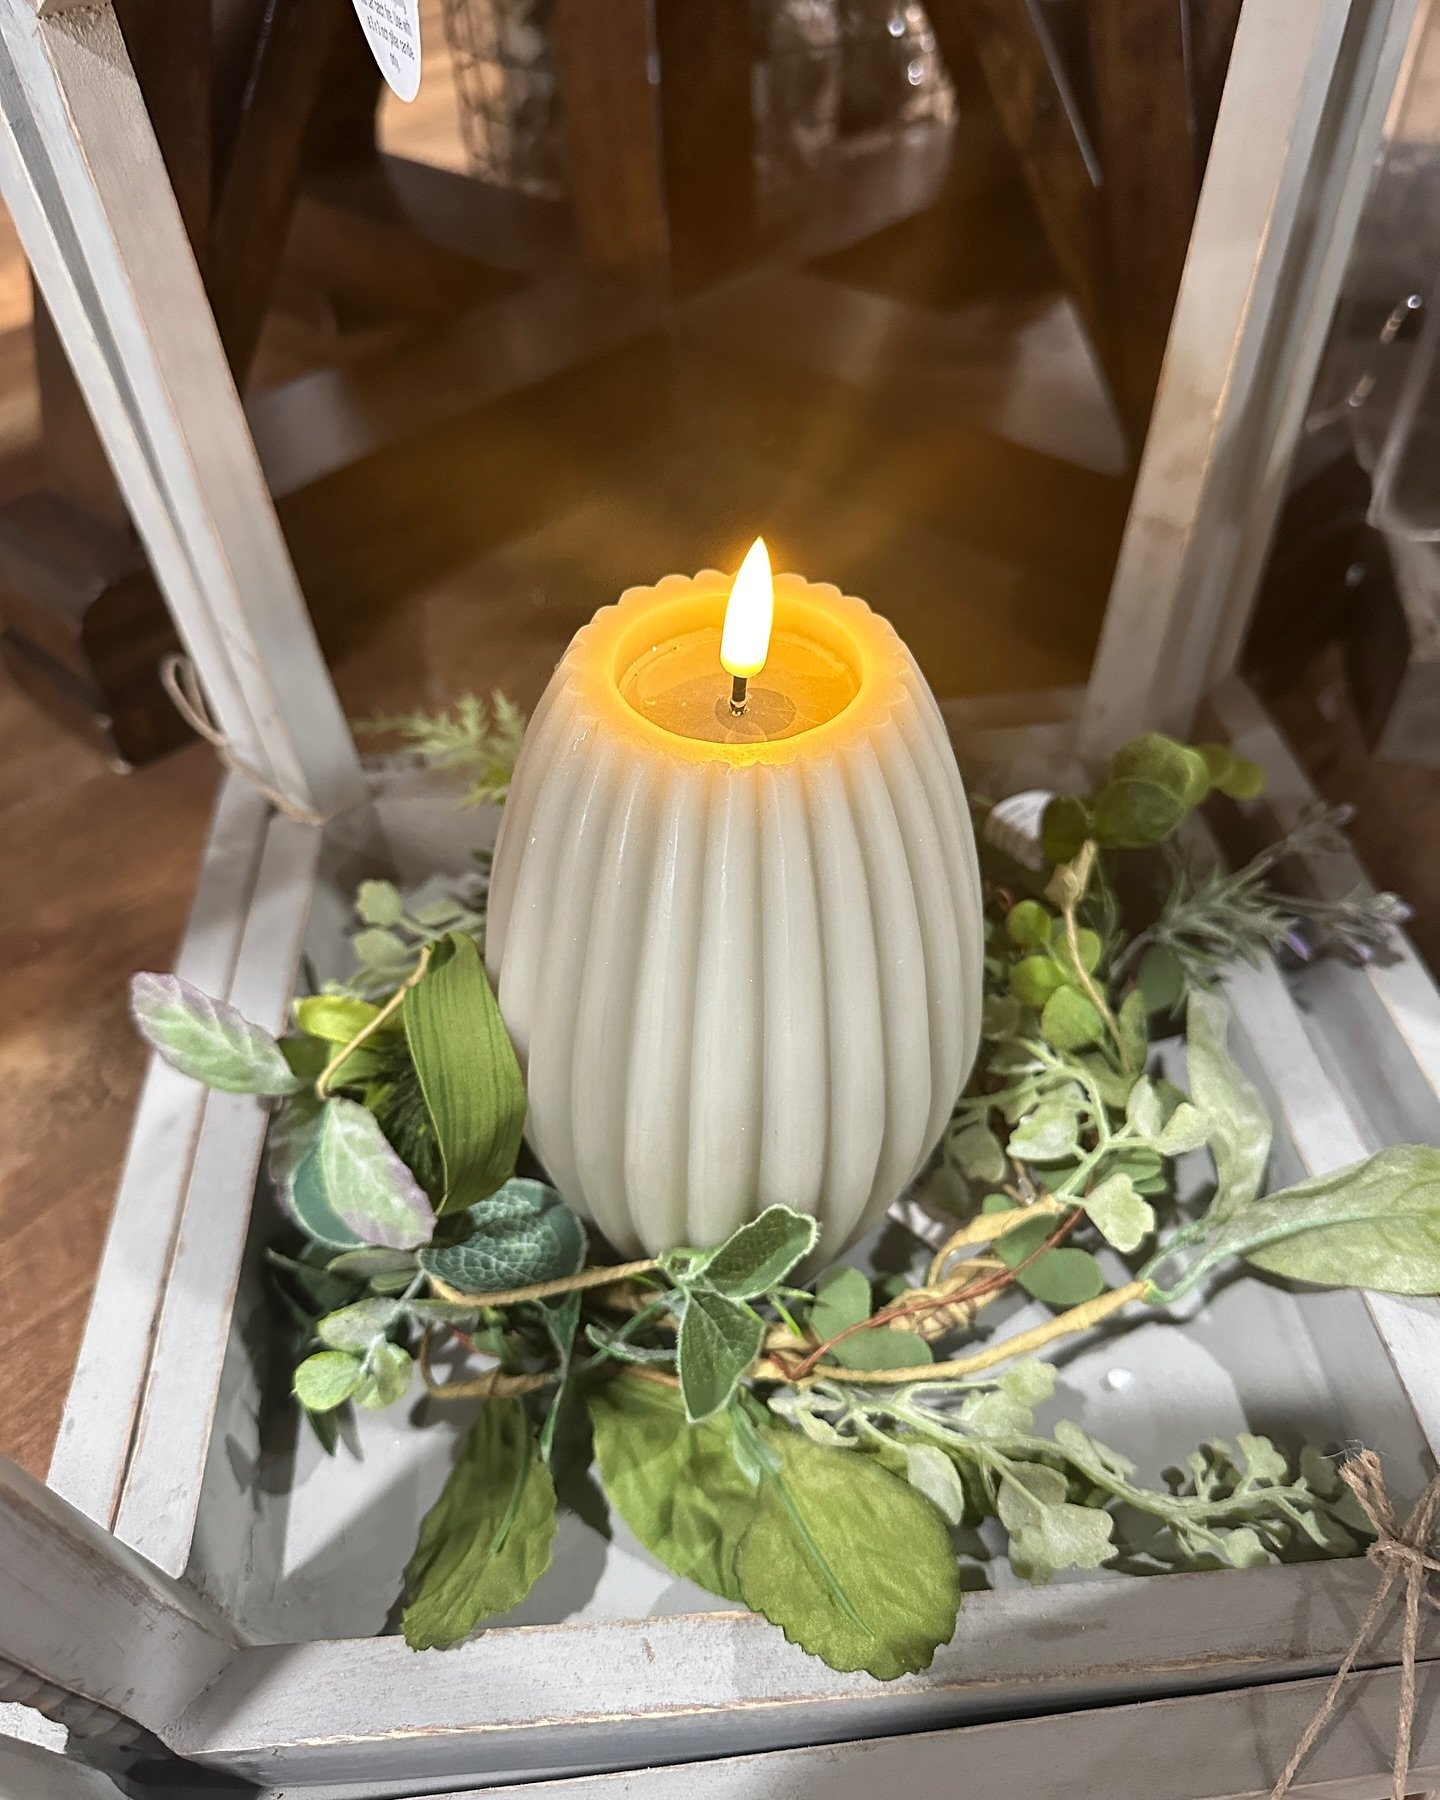 BACK IN STOCK!!

Our Sand colored LED striped candles are BACK! Small and large available. Stock up now!!